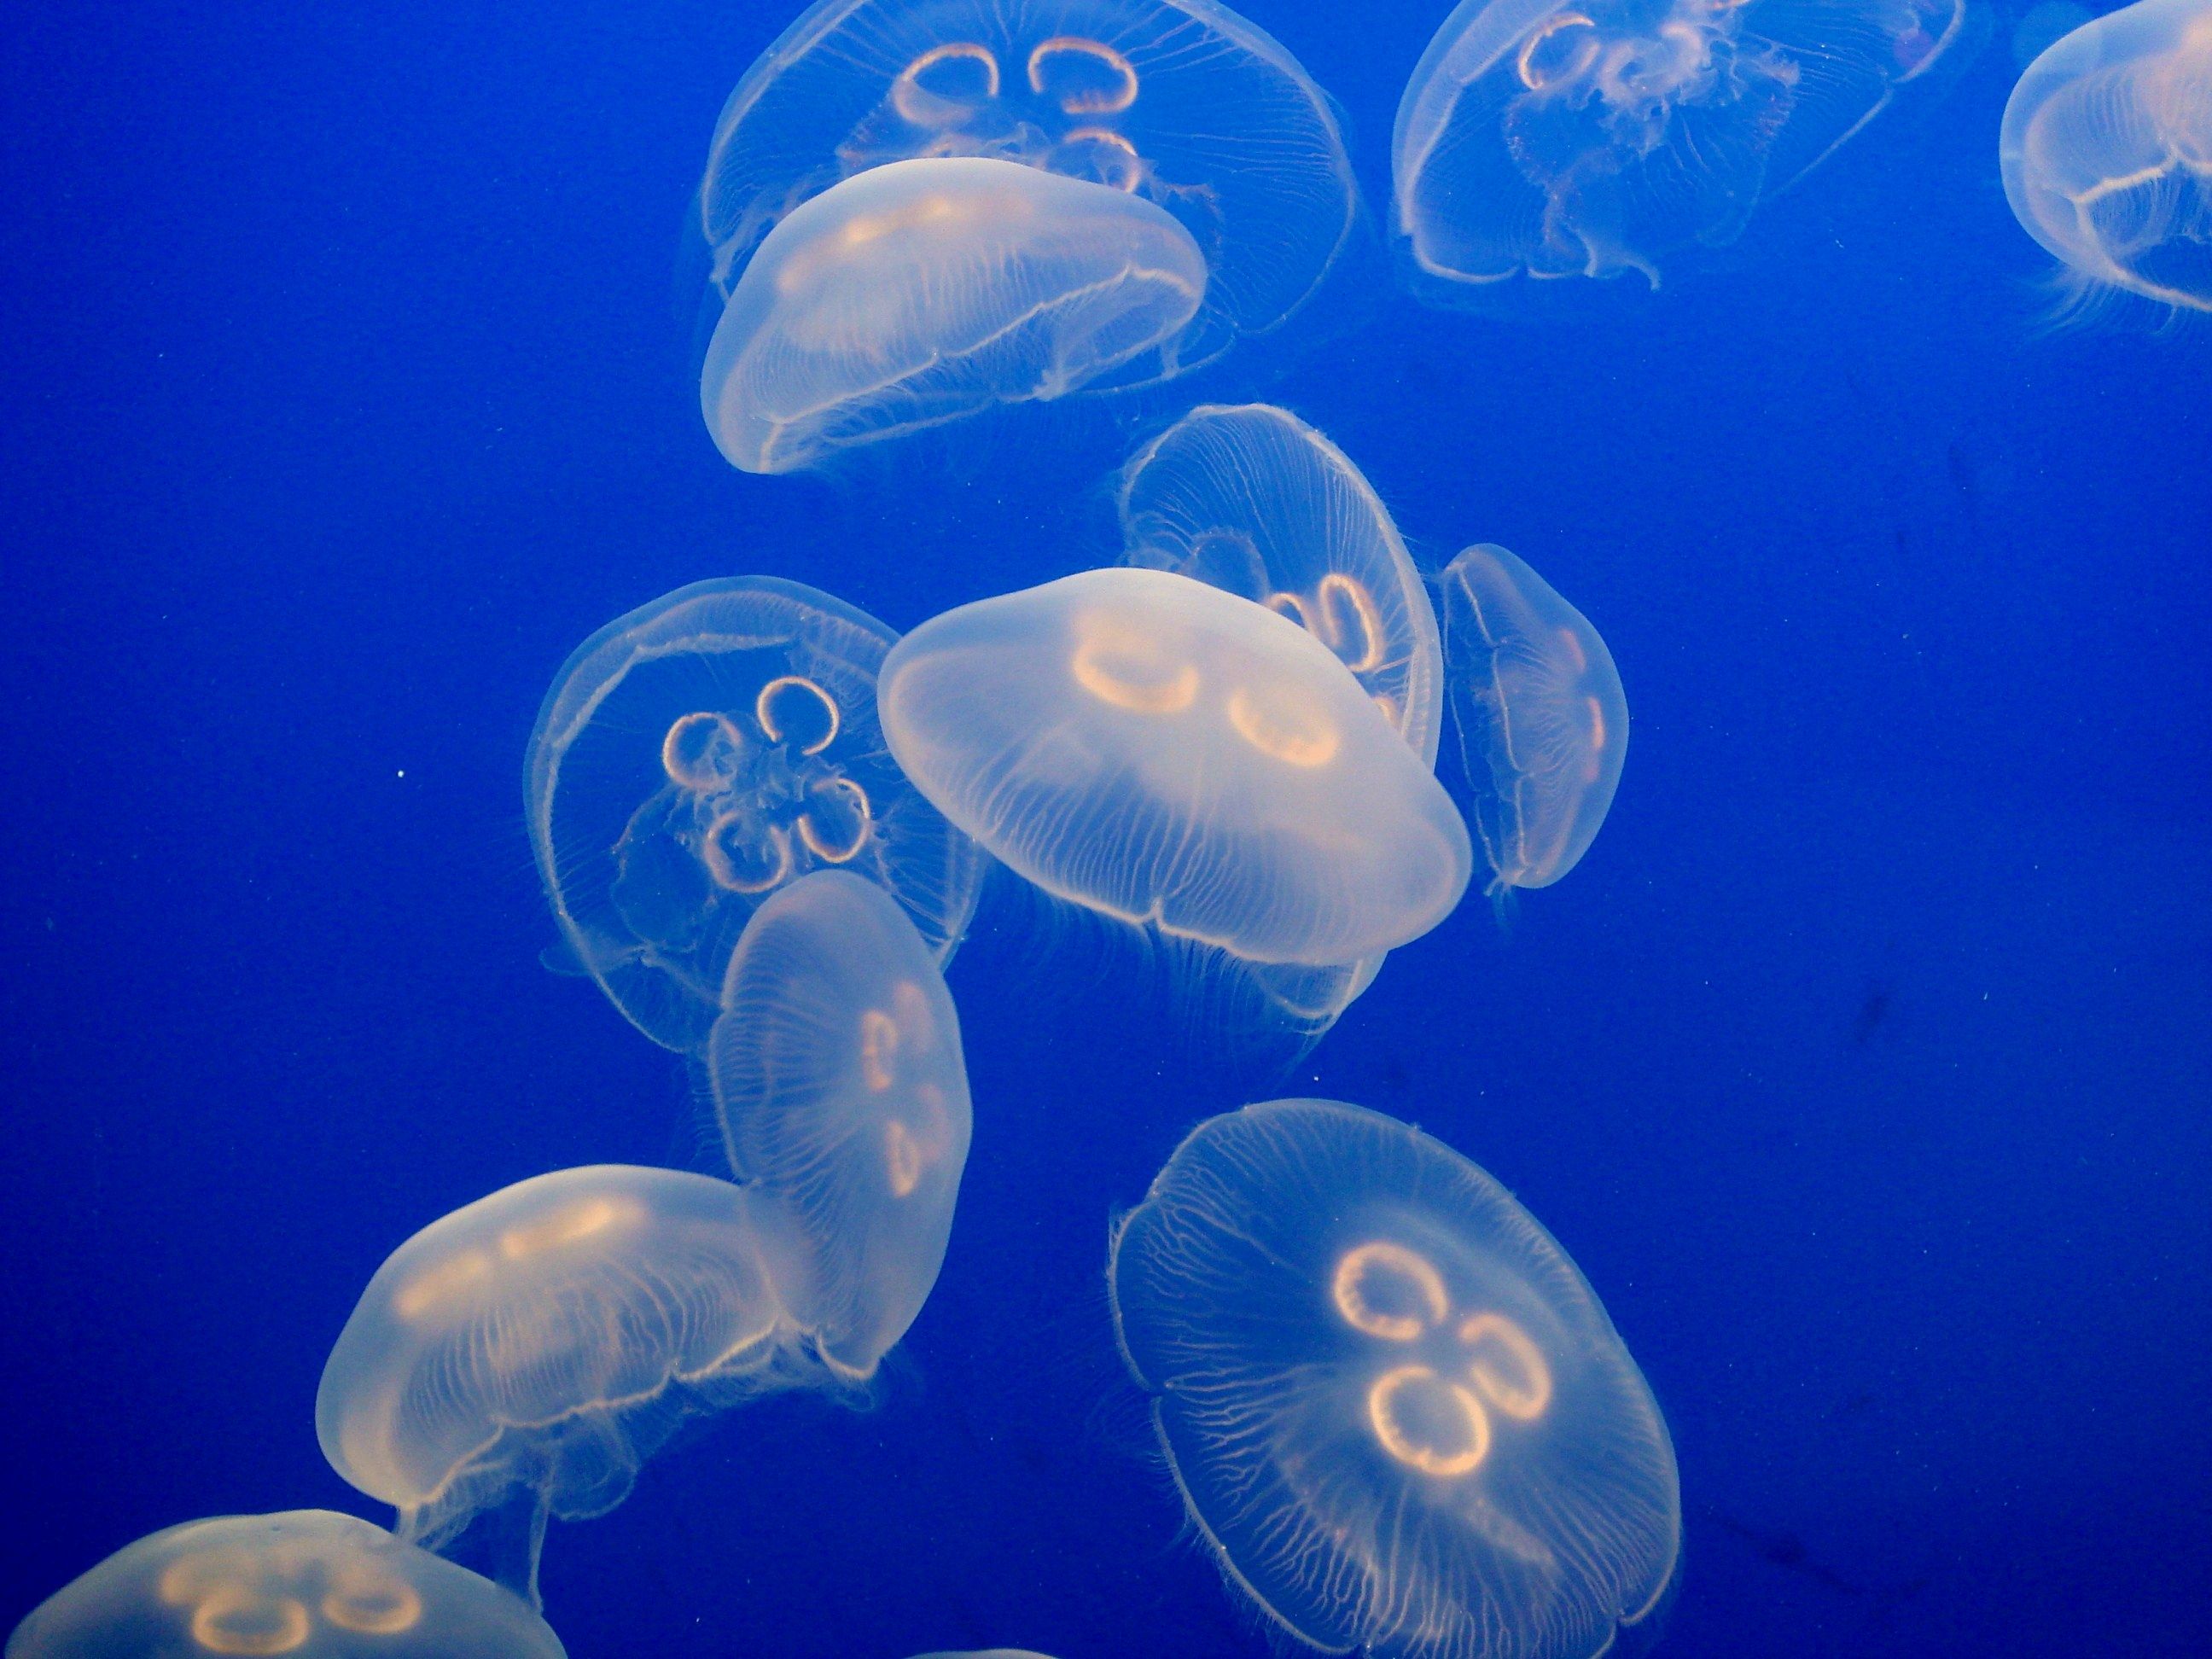 Jiggly Jellyfish from Dazzling to Deadly (72 Splendid Photos ...